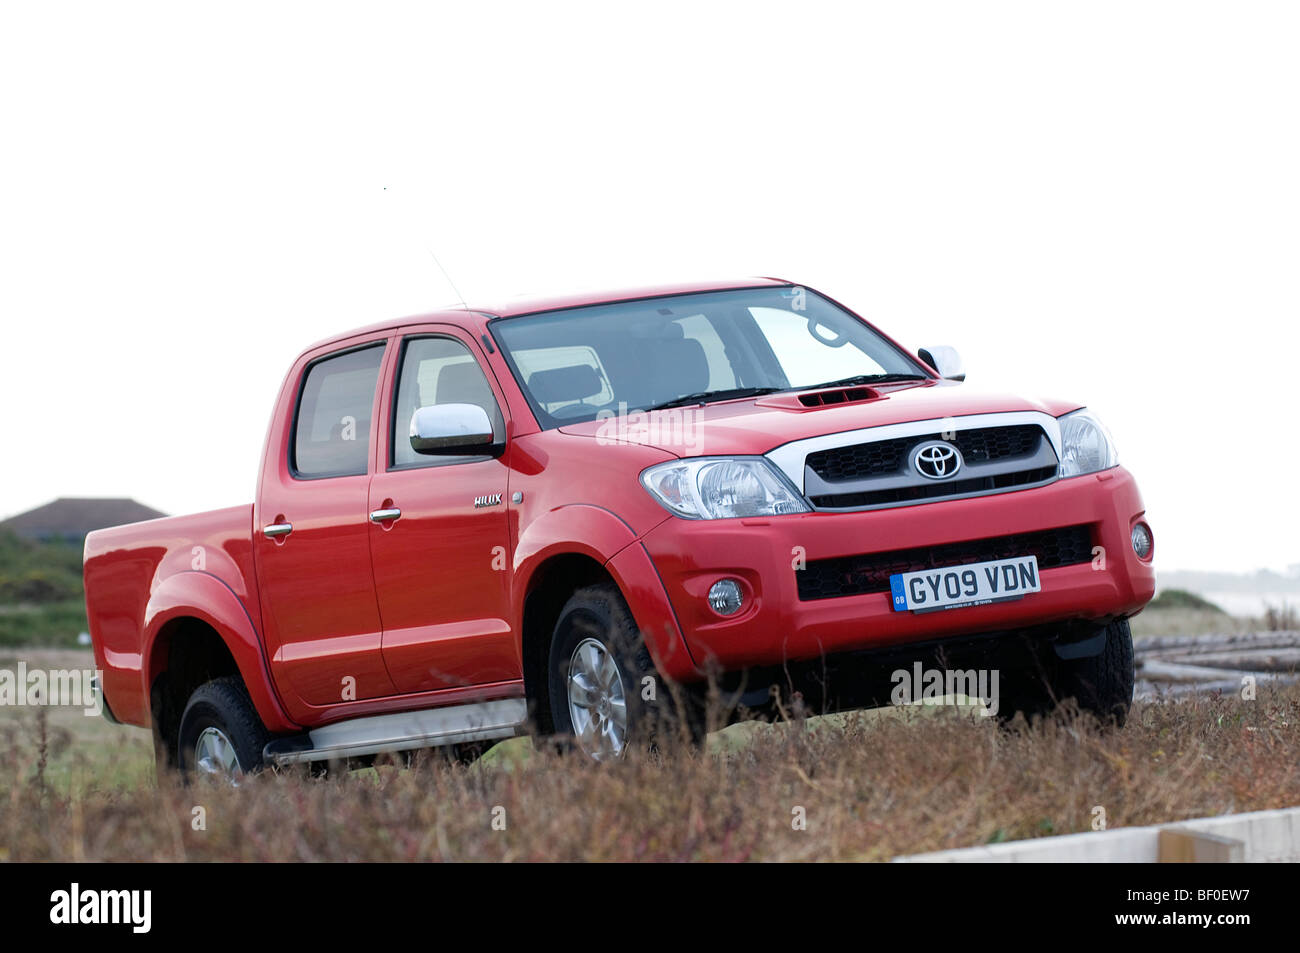 2009 Toyota Hilux pick up truck Stock Photo